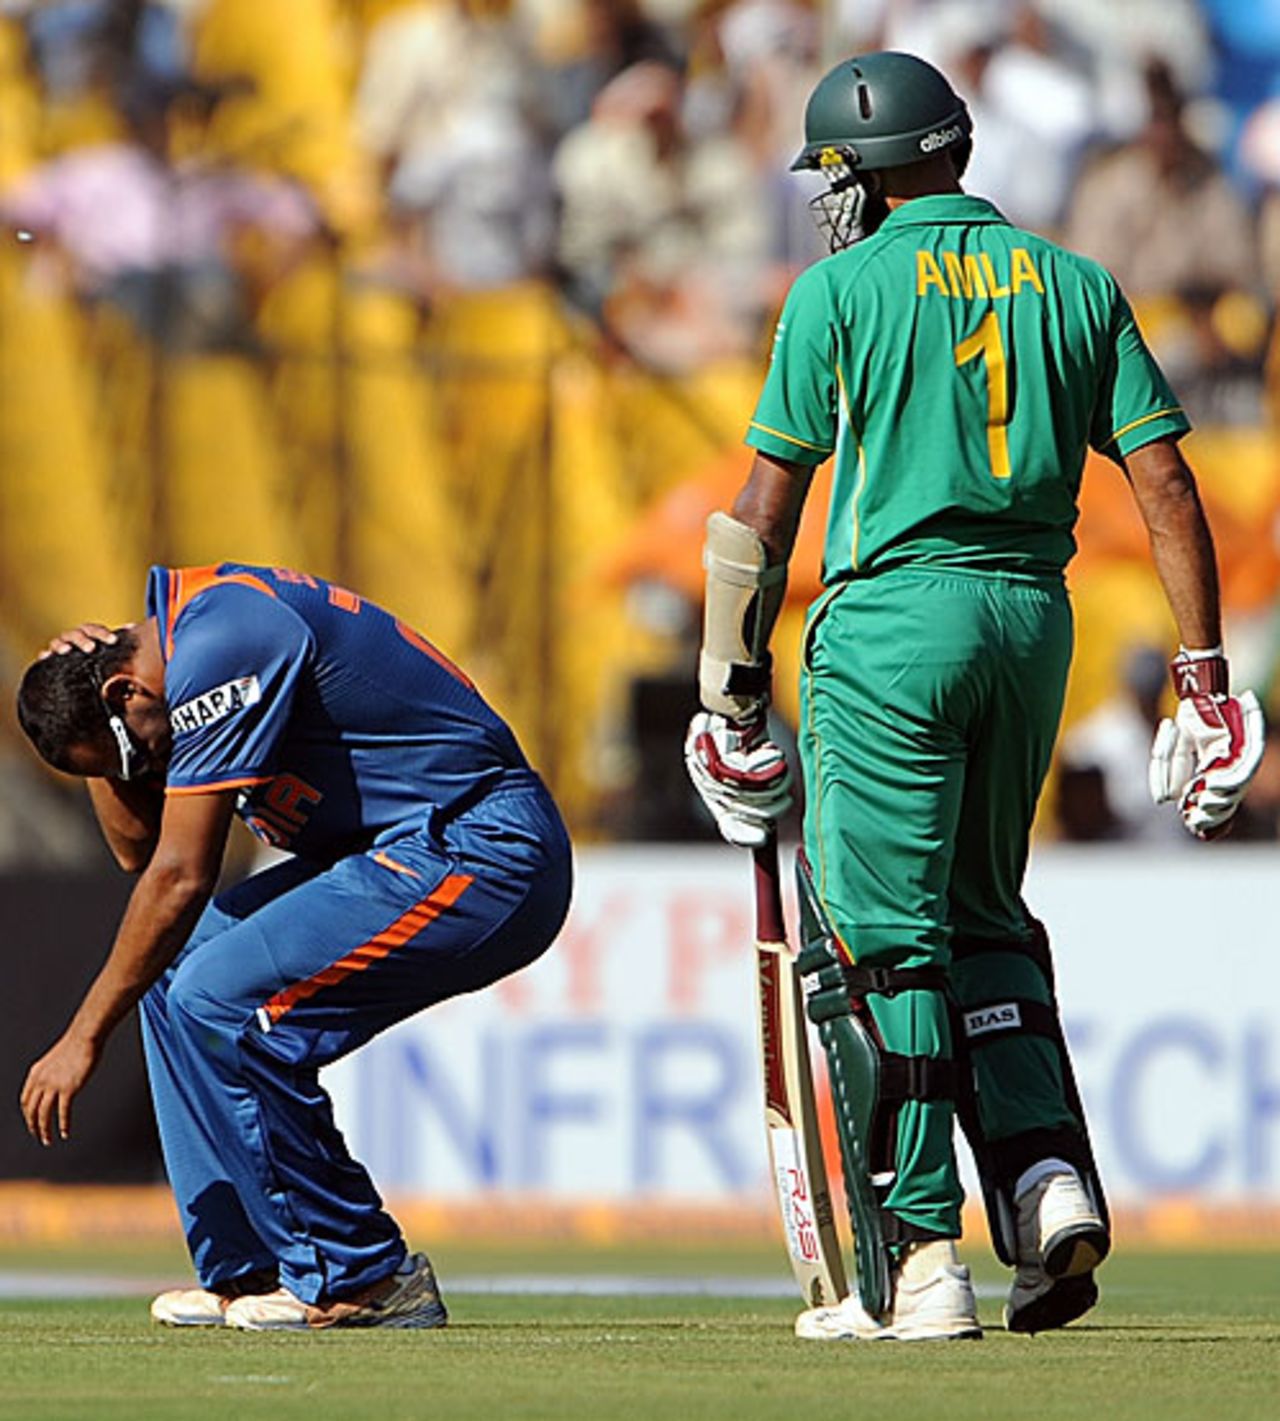 Yusuf Pathan is in pain after a collision with Hashim Amla, India v South Africa, 3rd ODI, Ahmedabad, February 27, 2010